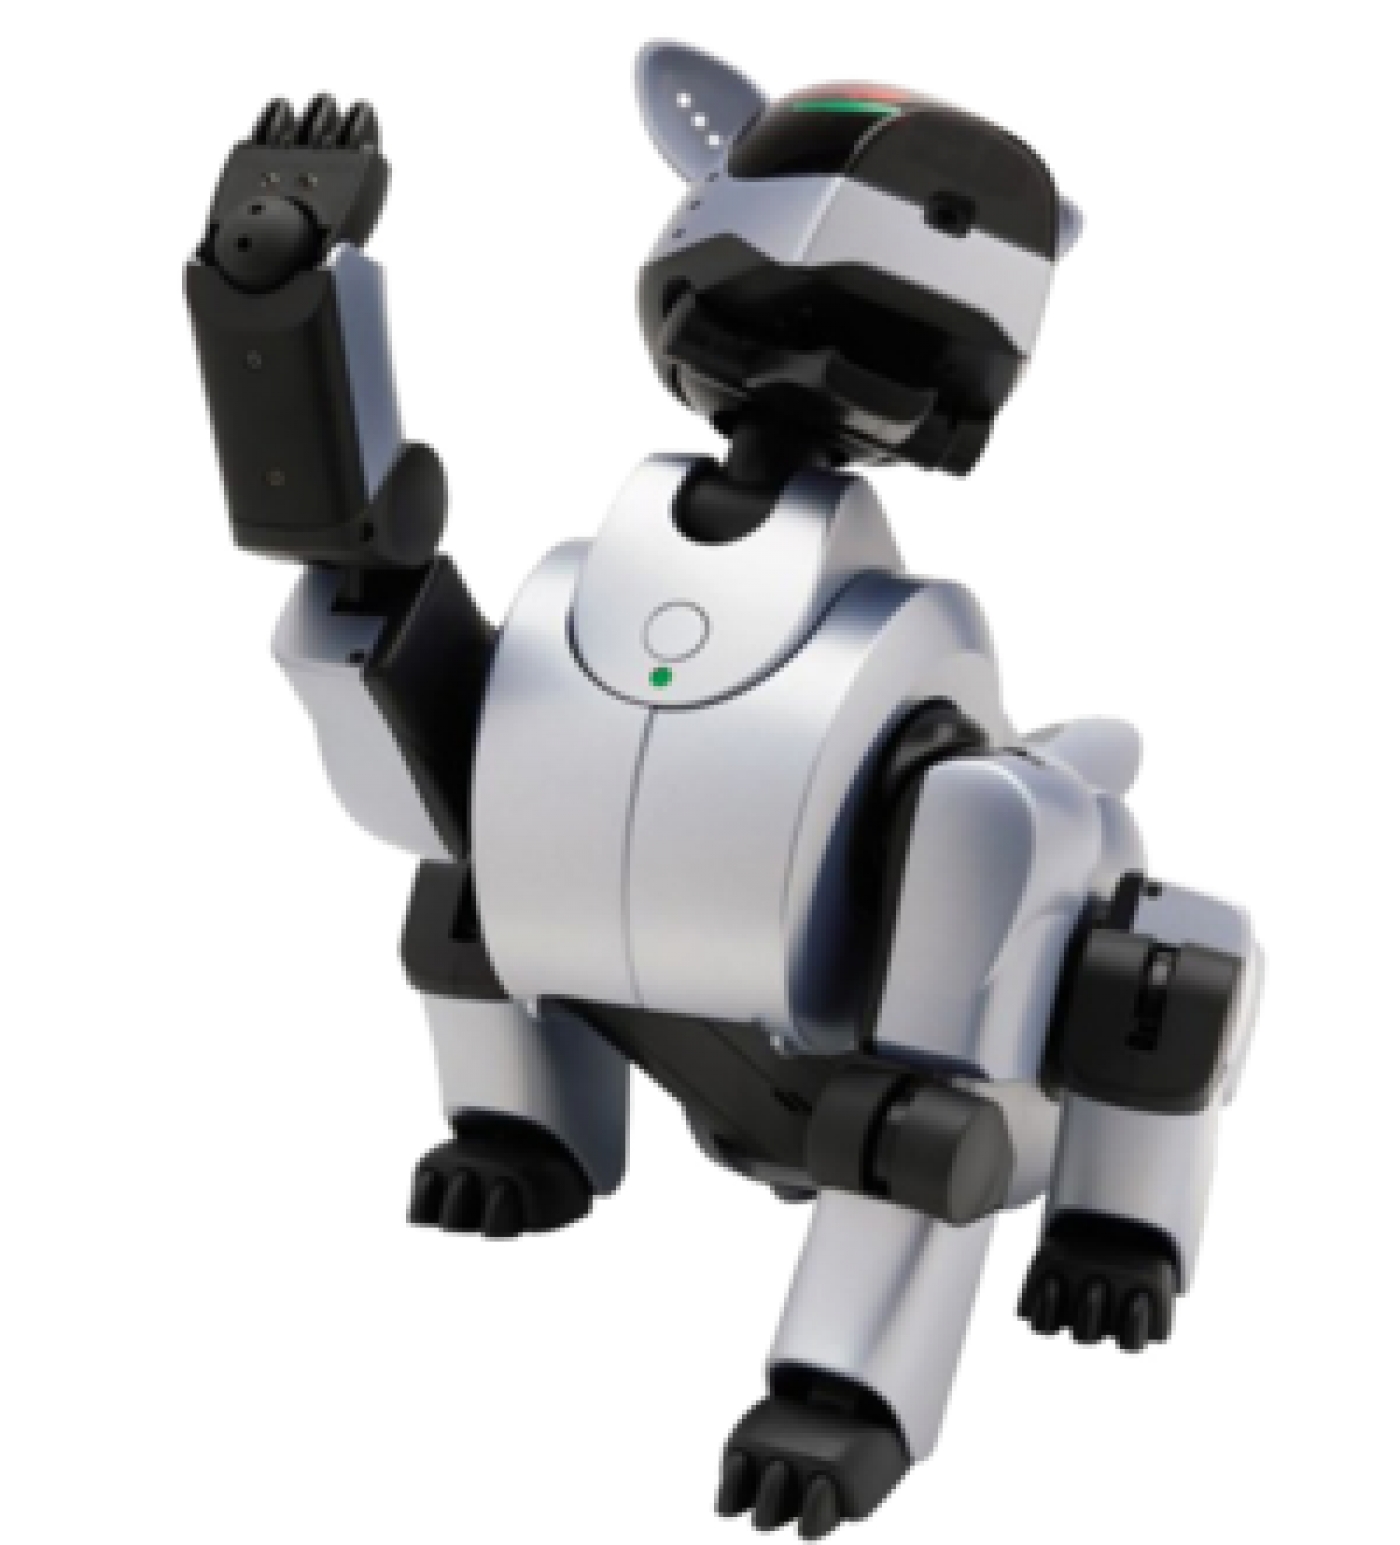 The Sony Aibo ERS-210